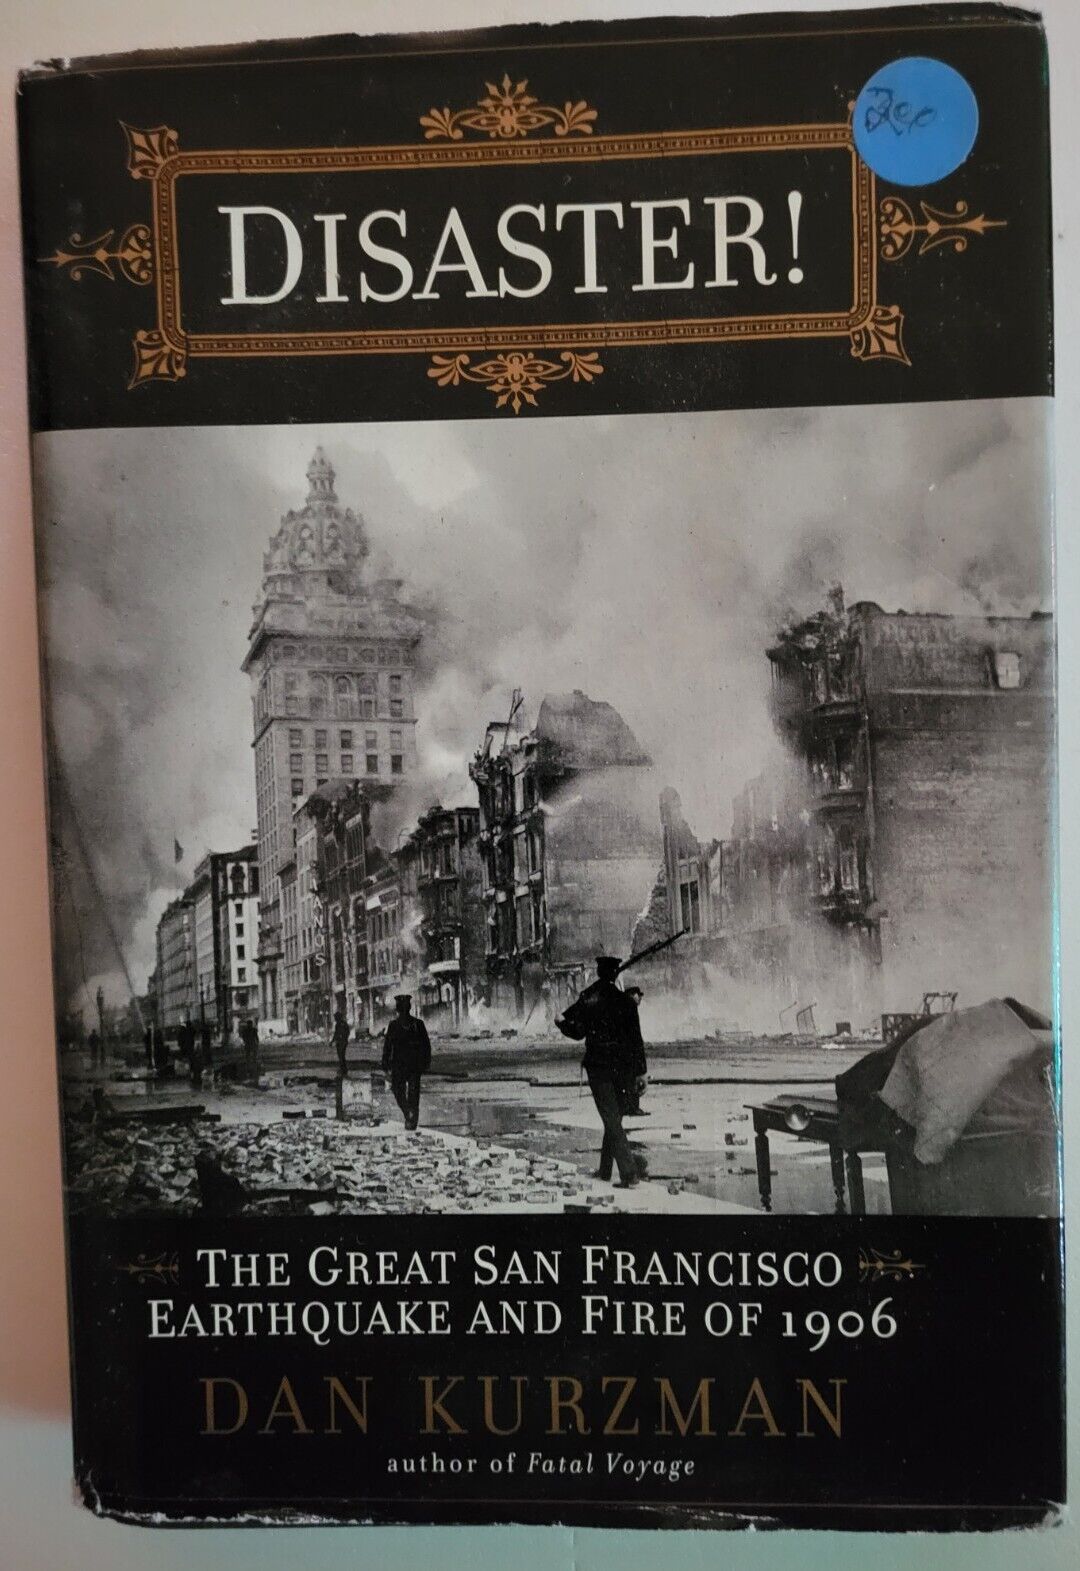 Disaster, The Great San Francisco Earthquake and Fire of 1906, by D Kurtzman